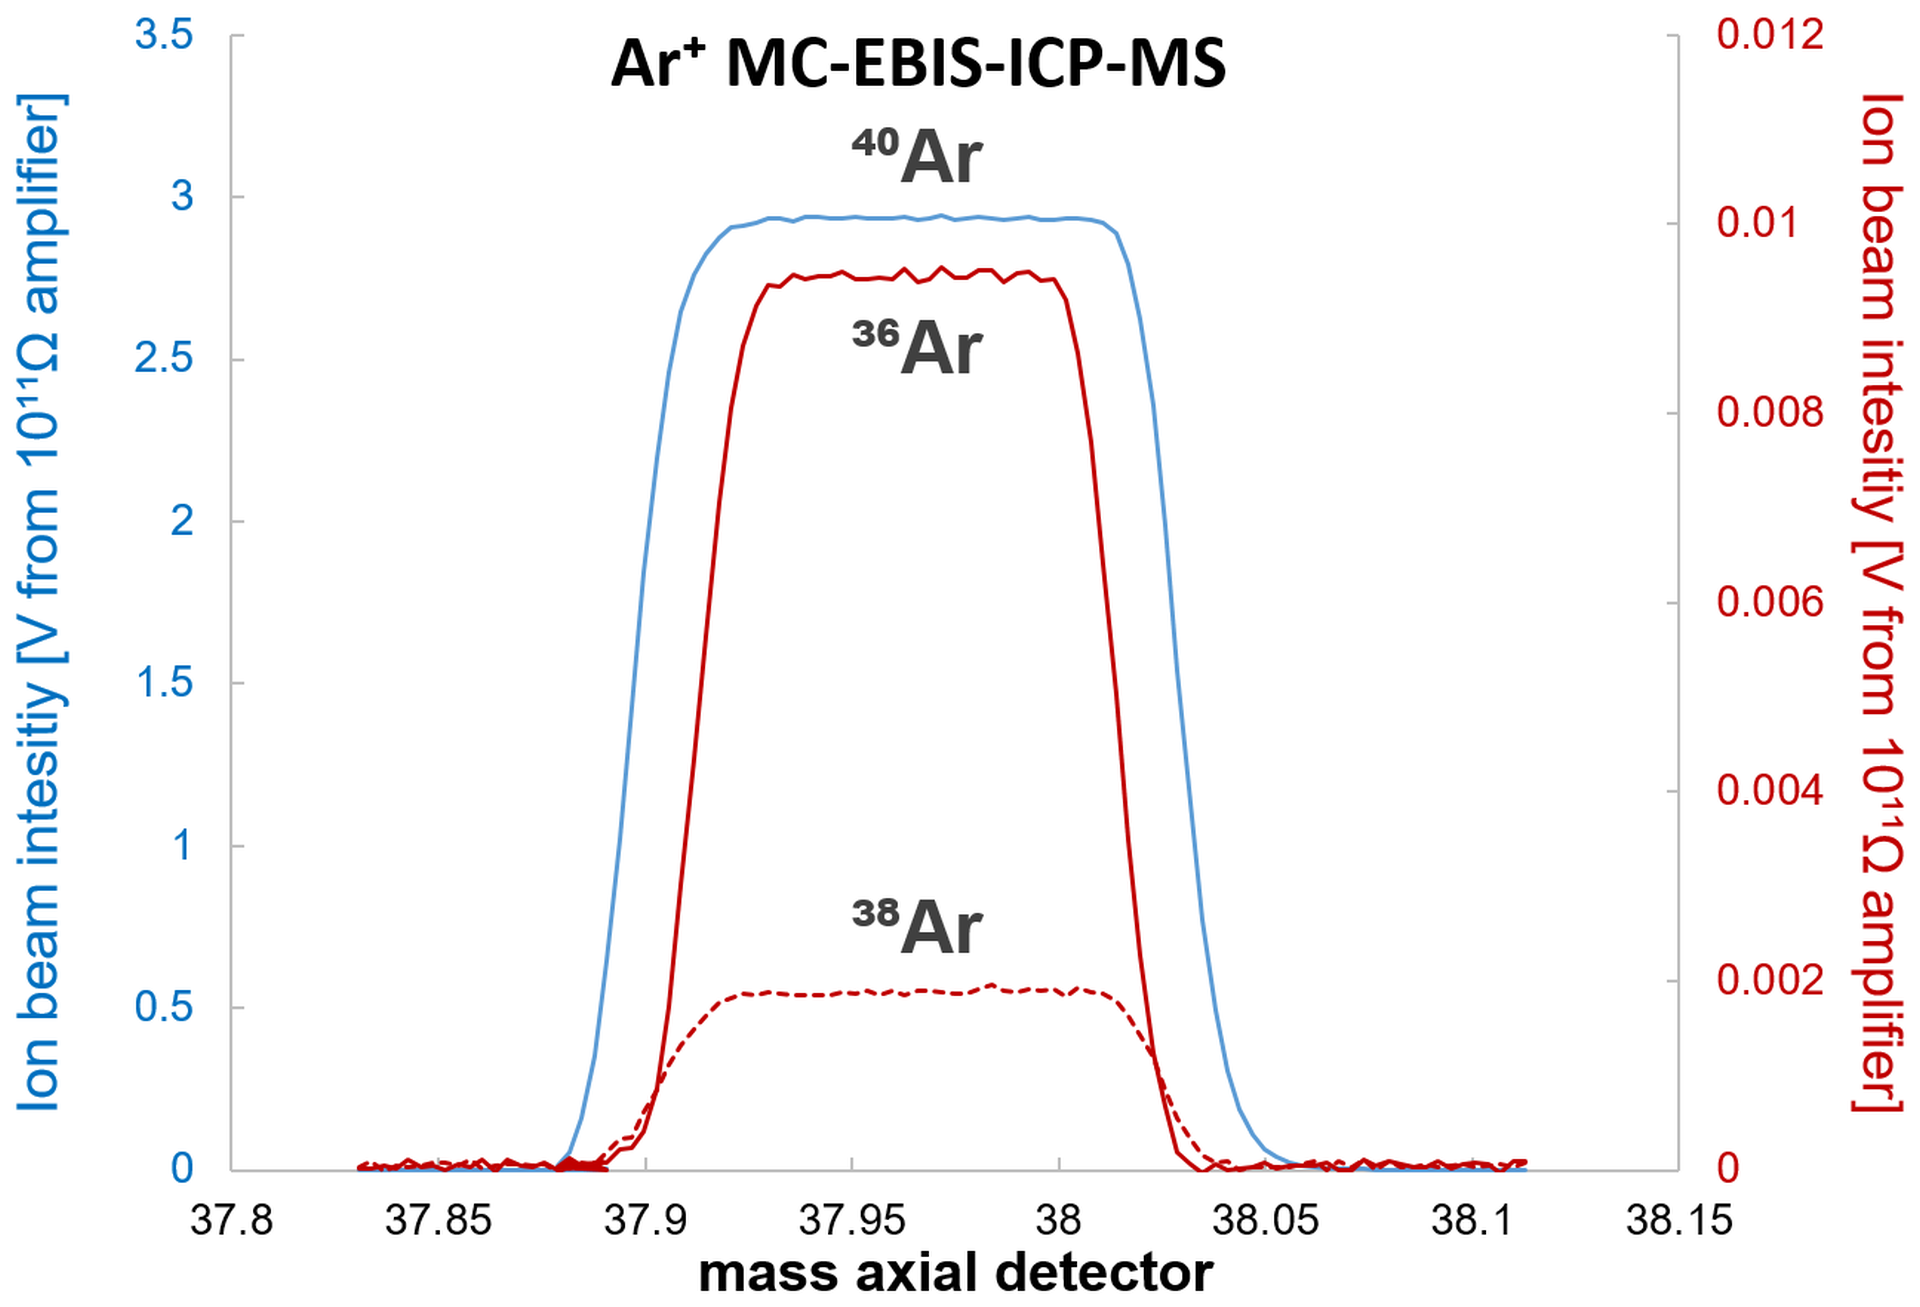 Fig. 2 Simultaneous mass scan illustrating a perfect alignment and focusing of the singly positive Ar40, Ar38 (axial detector), and Ar36 ion beams onto three faraday detectors of the Nu Instruments Plasma 3 MC-ICP-MS detector array. Ar38 and Ar36 ion beam intensities are to scale and associated with the secondary y-axis label. © PSI